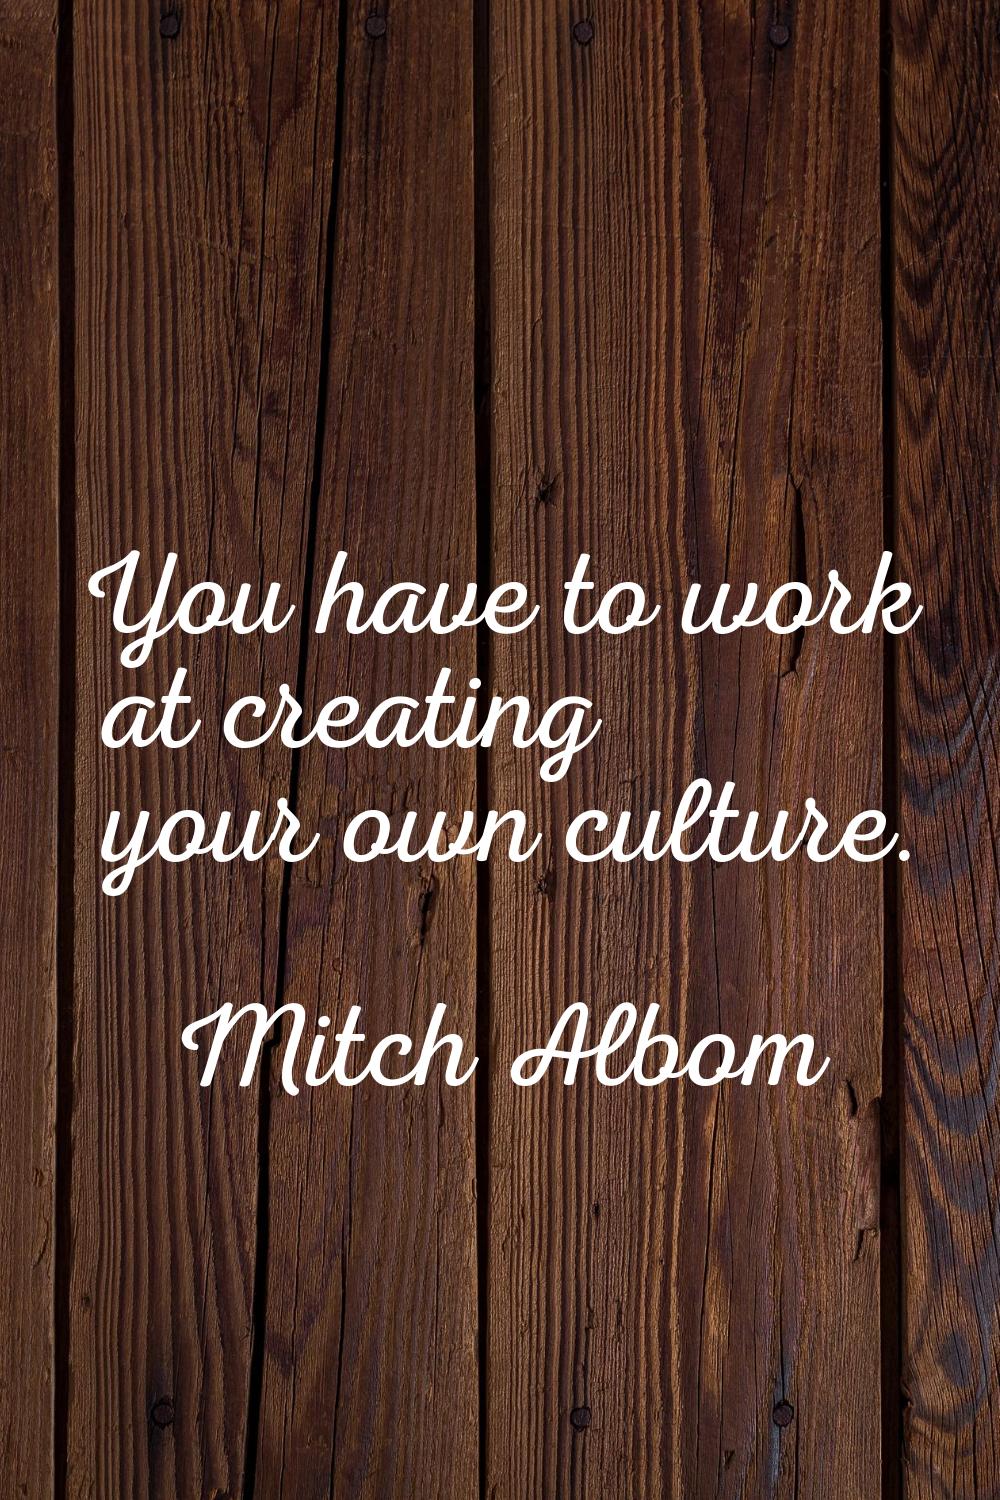 You have to work at creating your own culture.